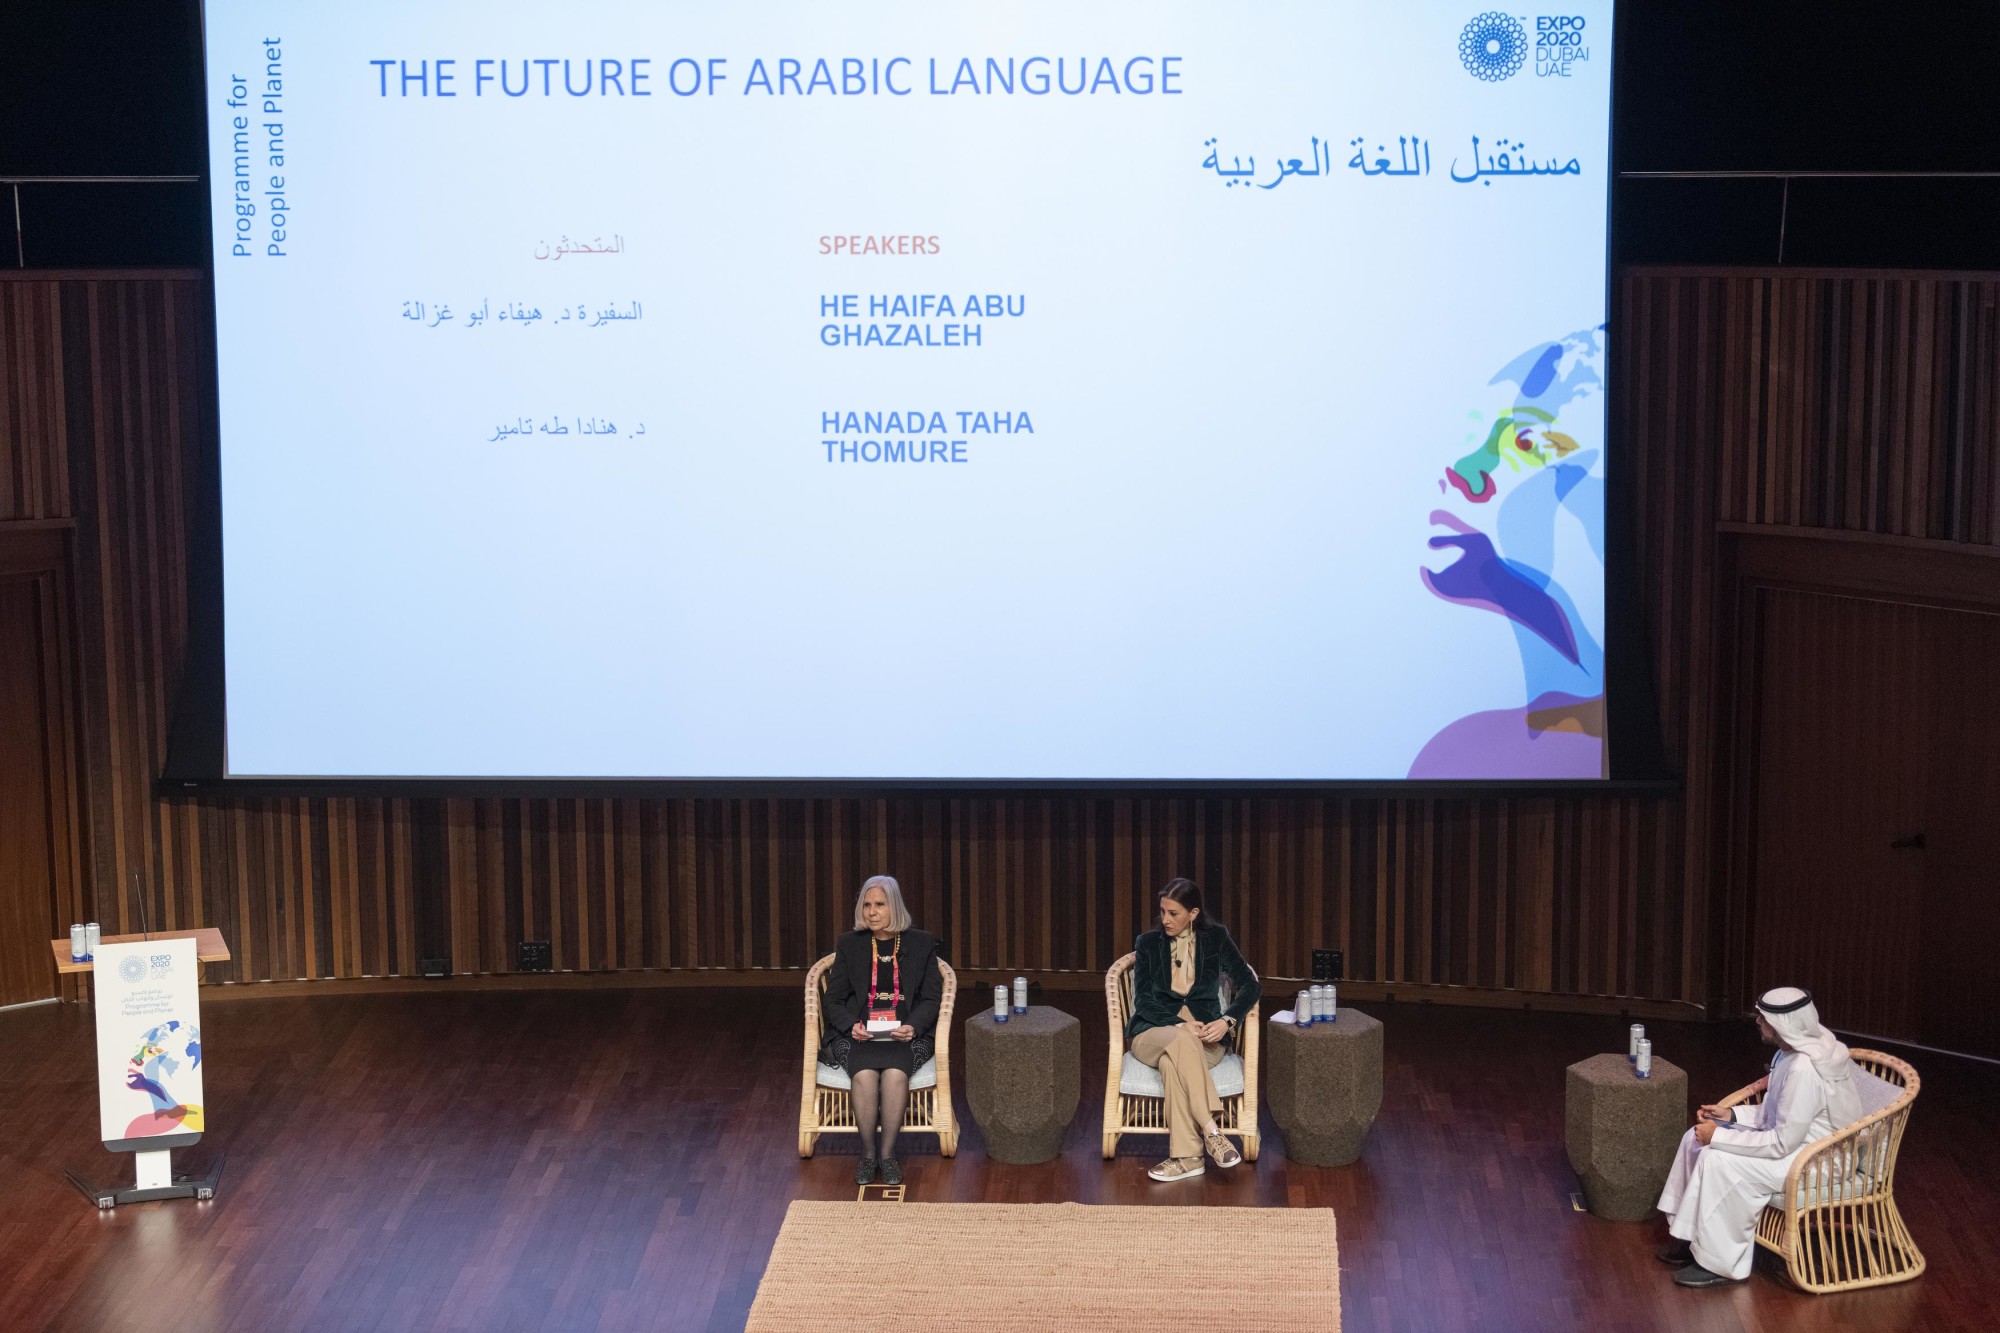 Her Excellency Haifa Abu Ghazaleh (L), Assistant Secretary General, League of Arab States and Hanada Haha Thomure (C), Endowed Chair Professor of Arabic Language at Zayed University at the World Arabic Language Day Flagship event at Terra A